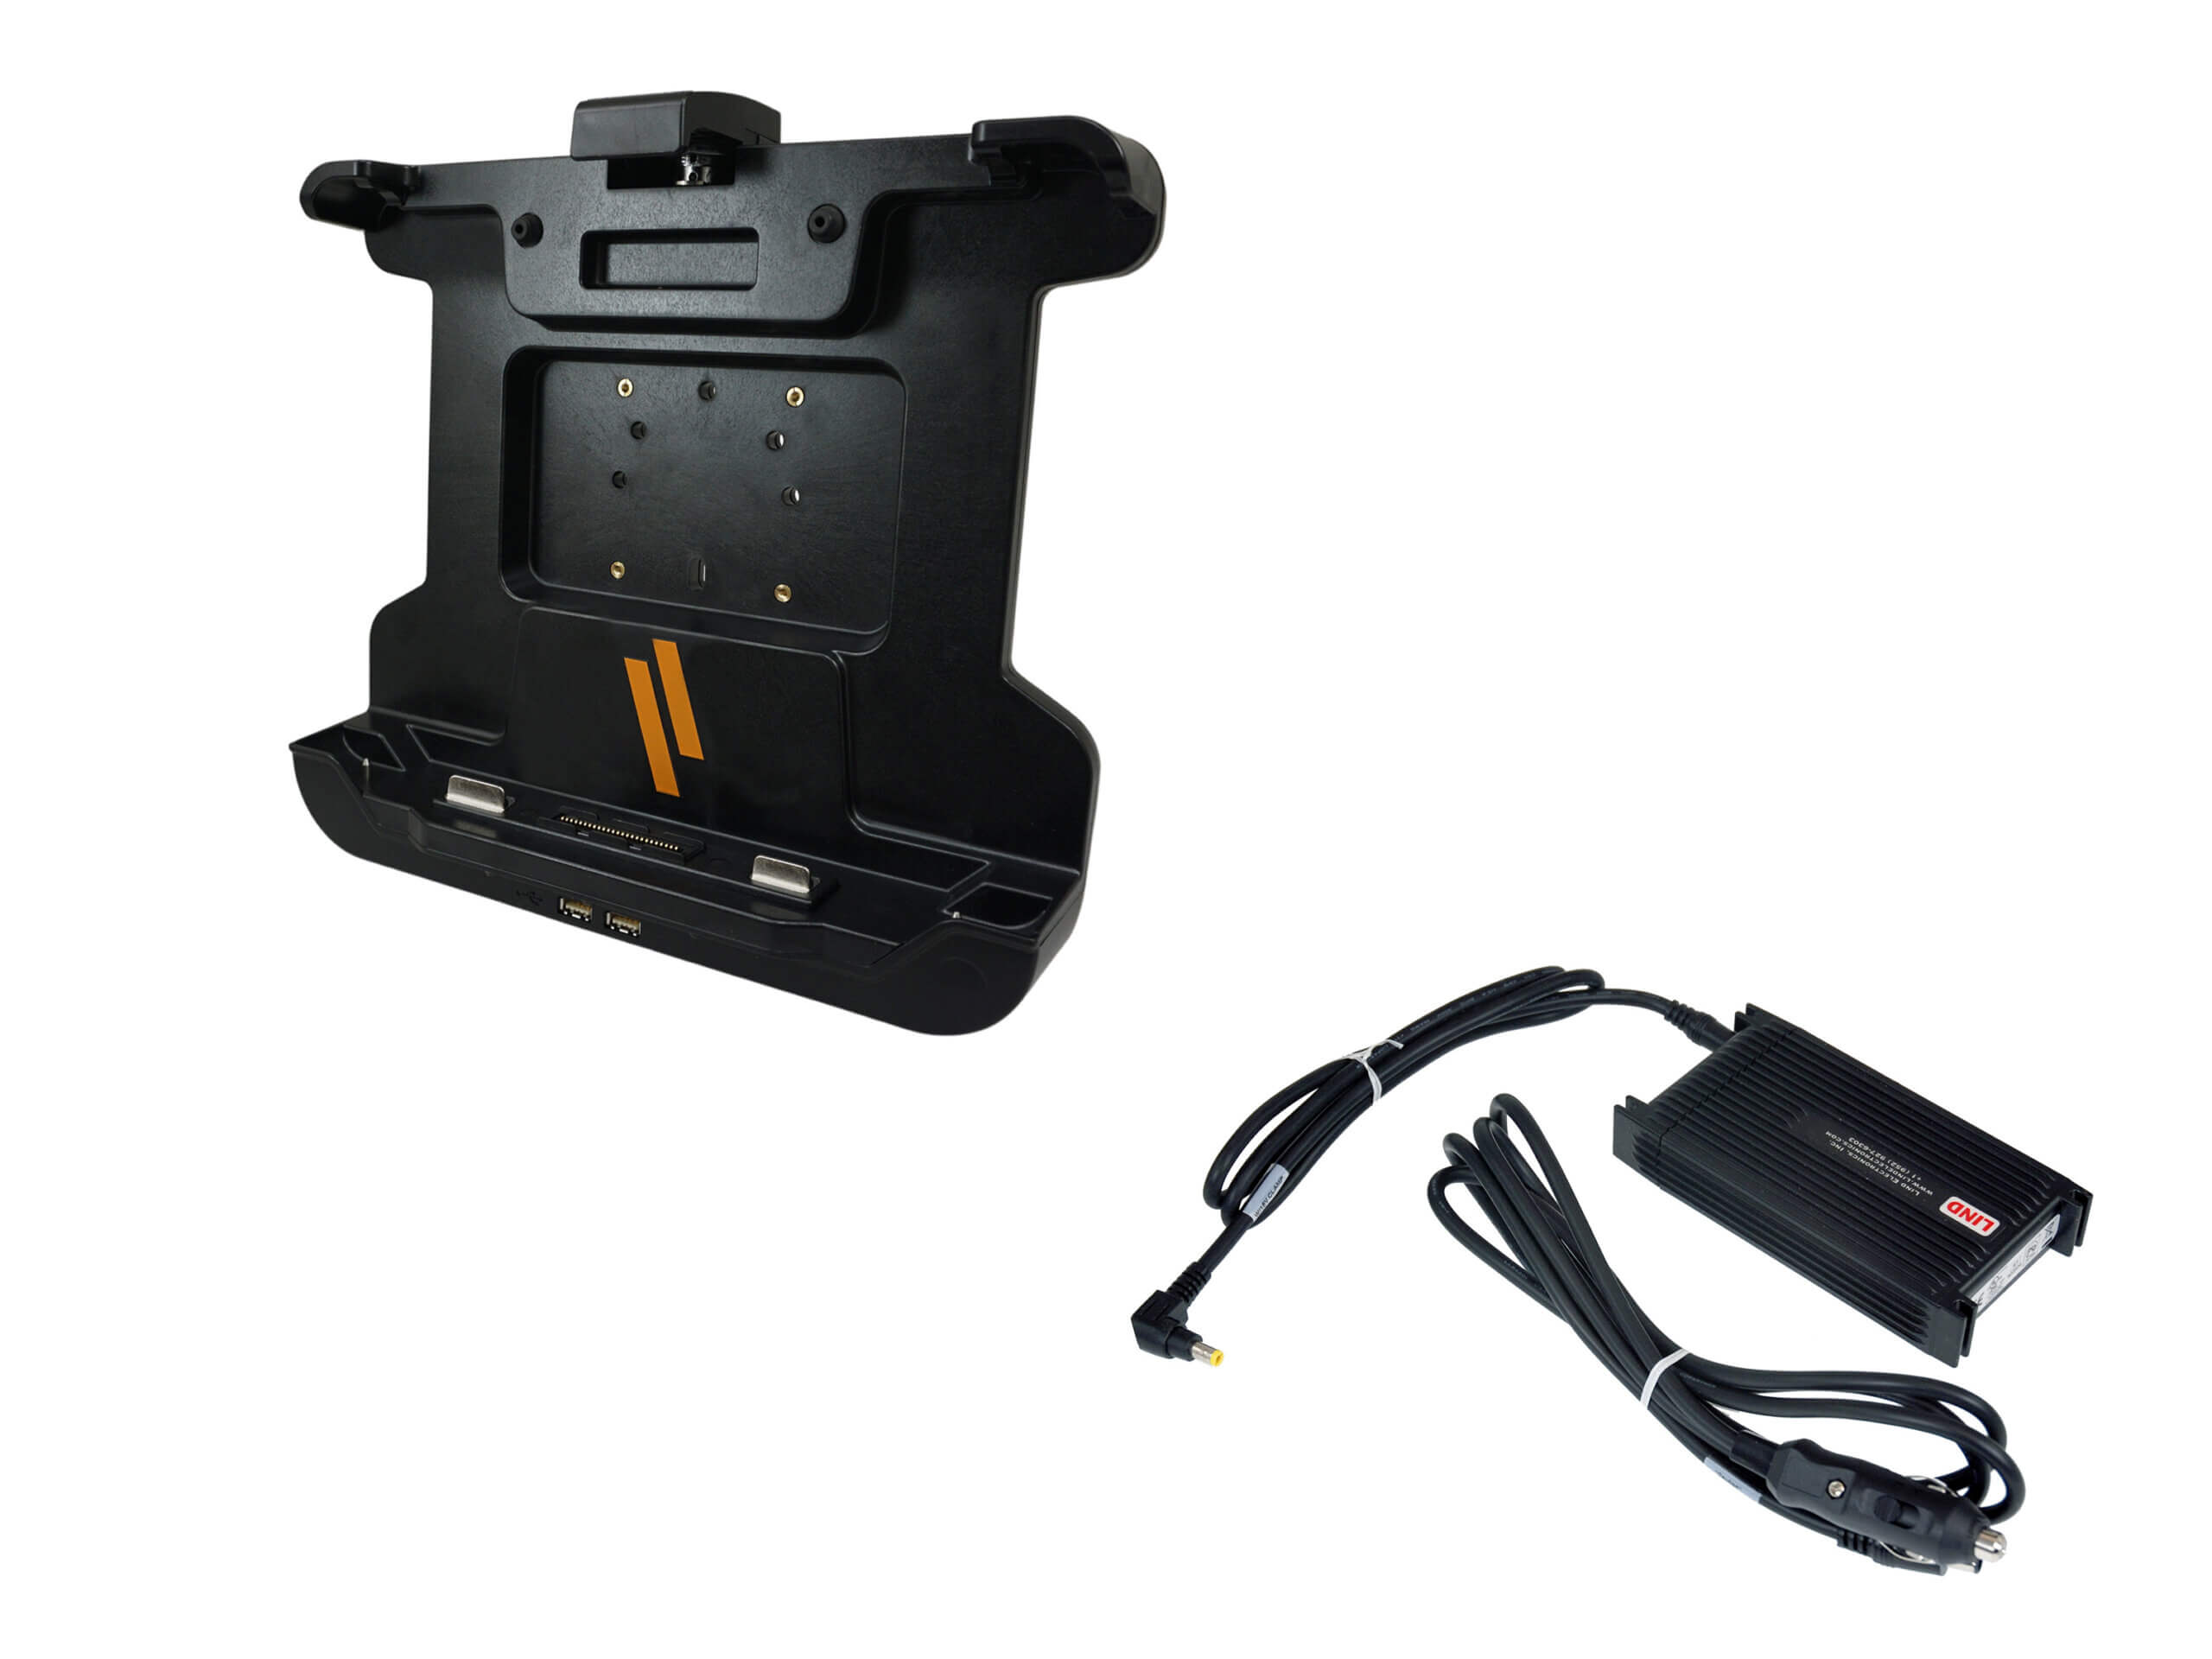 Docking Station For Panasonic TOUGHBOOK 33 Tablet with Standard Port Replication & LIND Power Supply